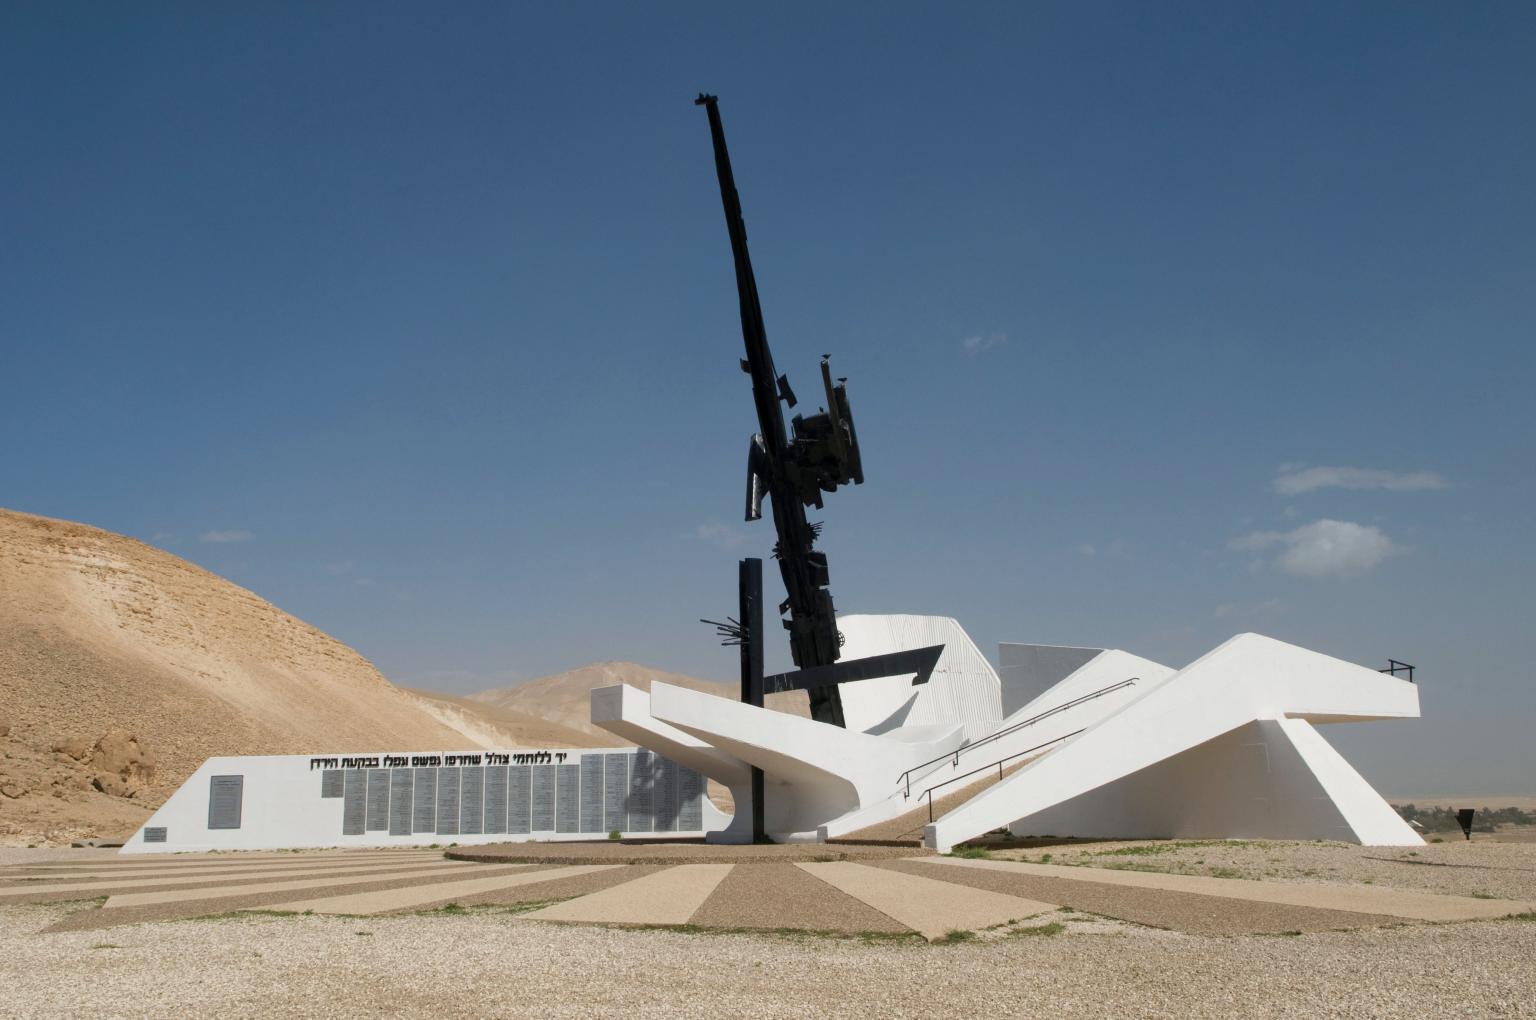 Cement and steel monument resembling a large firearm in a white base next to a building, surrounded by sand dunes.